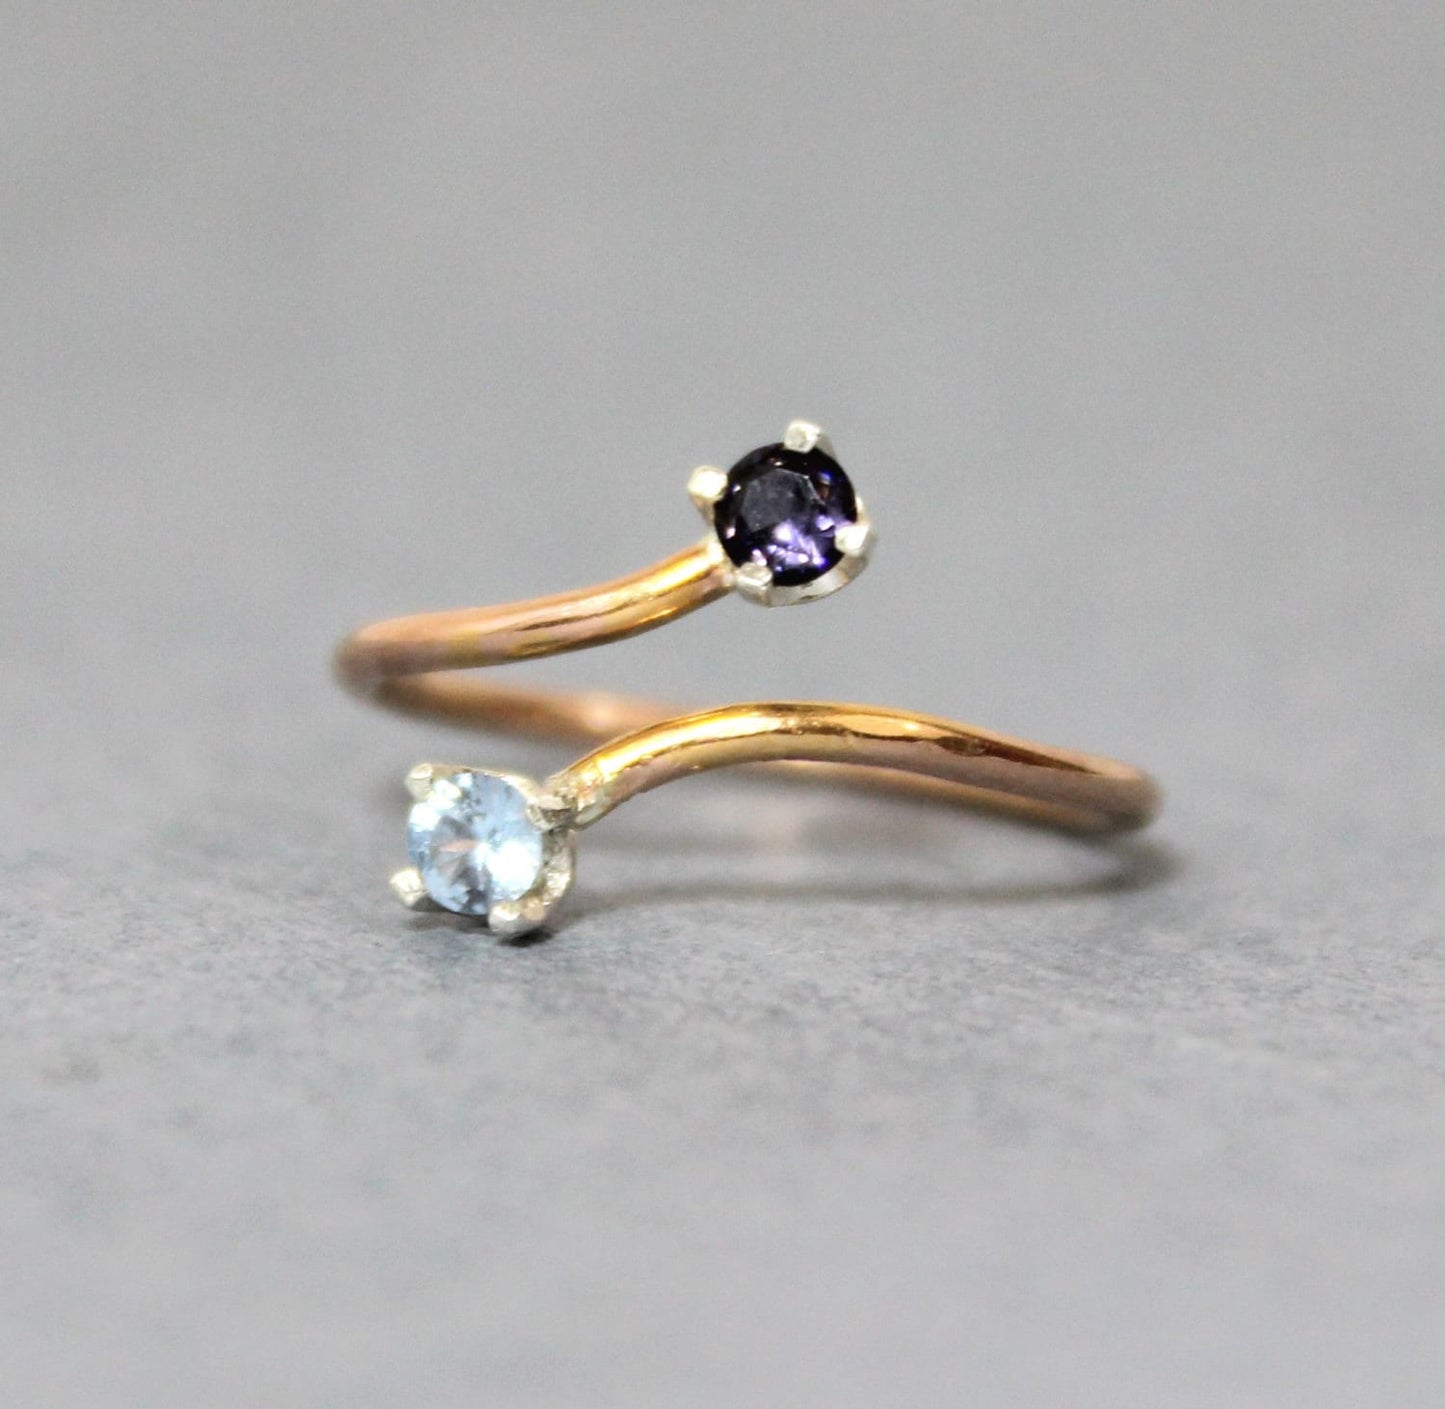 Personalized Dual Birthstone Ring - Amethyst and Aquamarine Cubic Zirconia Ring - 14K Rose Gold Filled Ring -Double Birthstone Ring